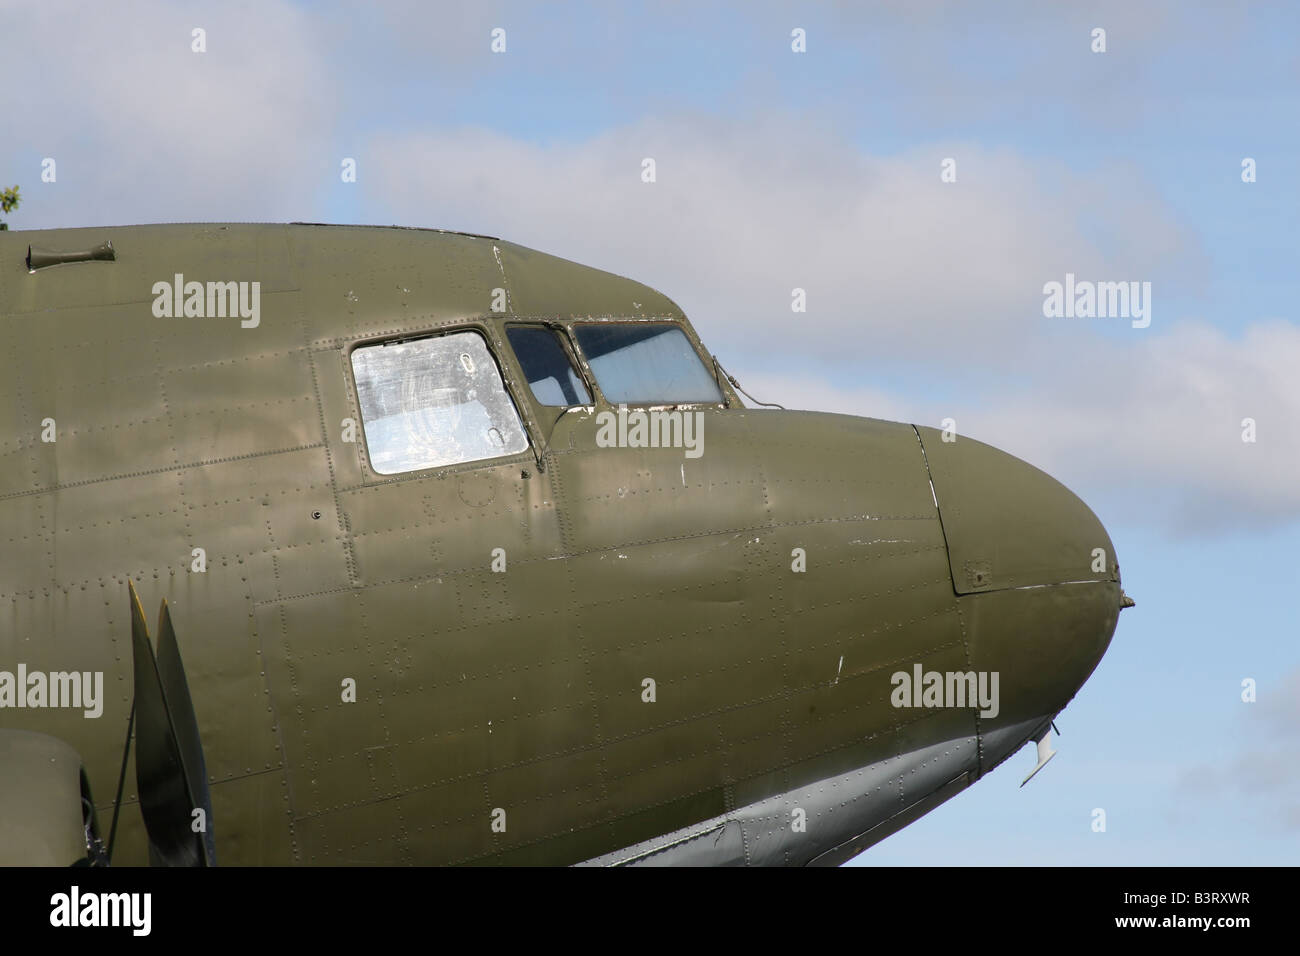 close up of dakota cockpit and nose. room for text. Stock Photo